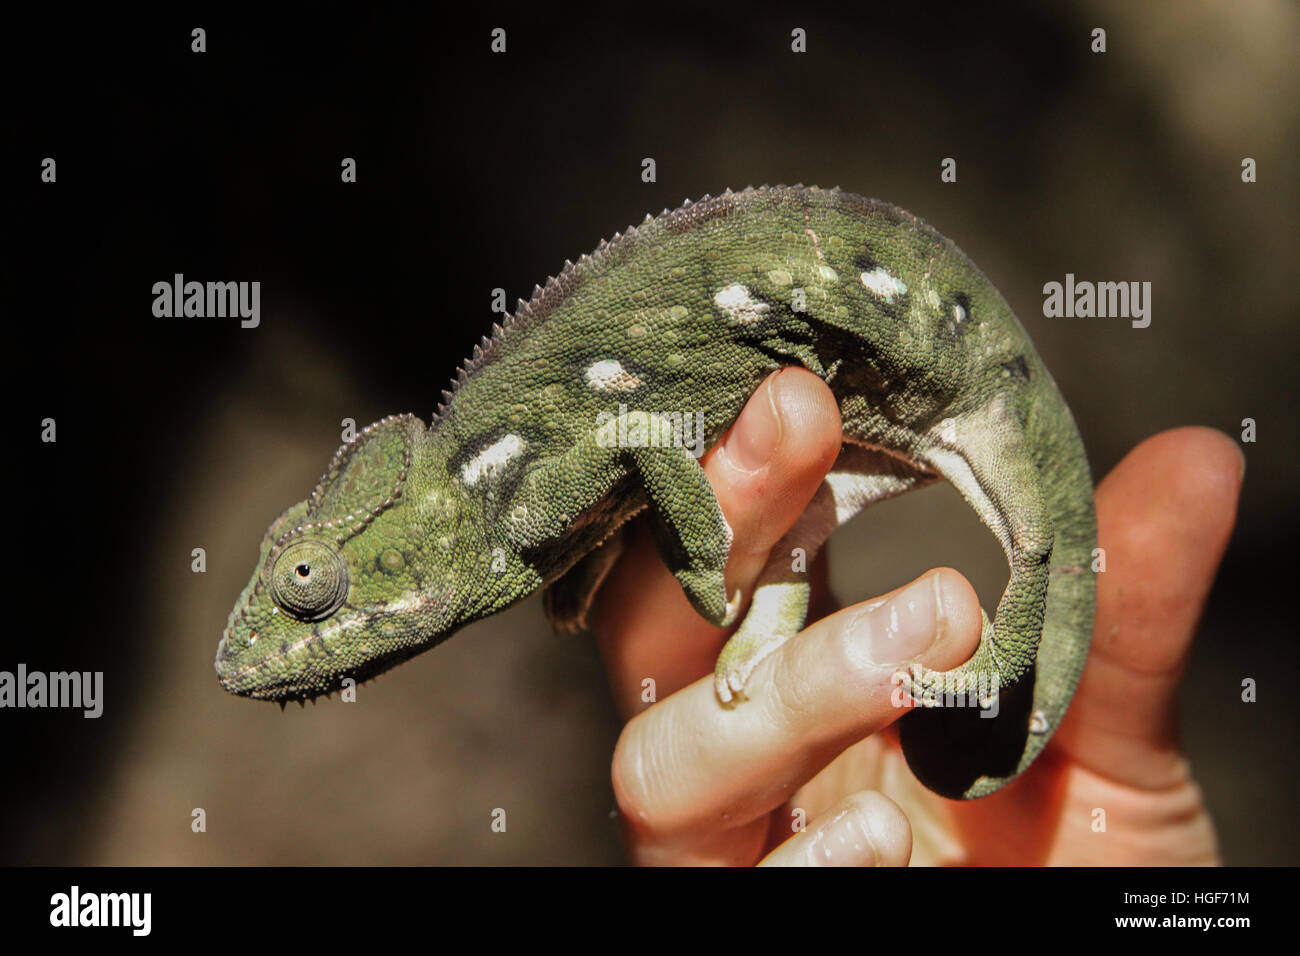 Chameleon on a human hand in Madagascar Stock Photo